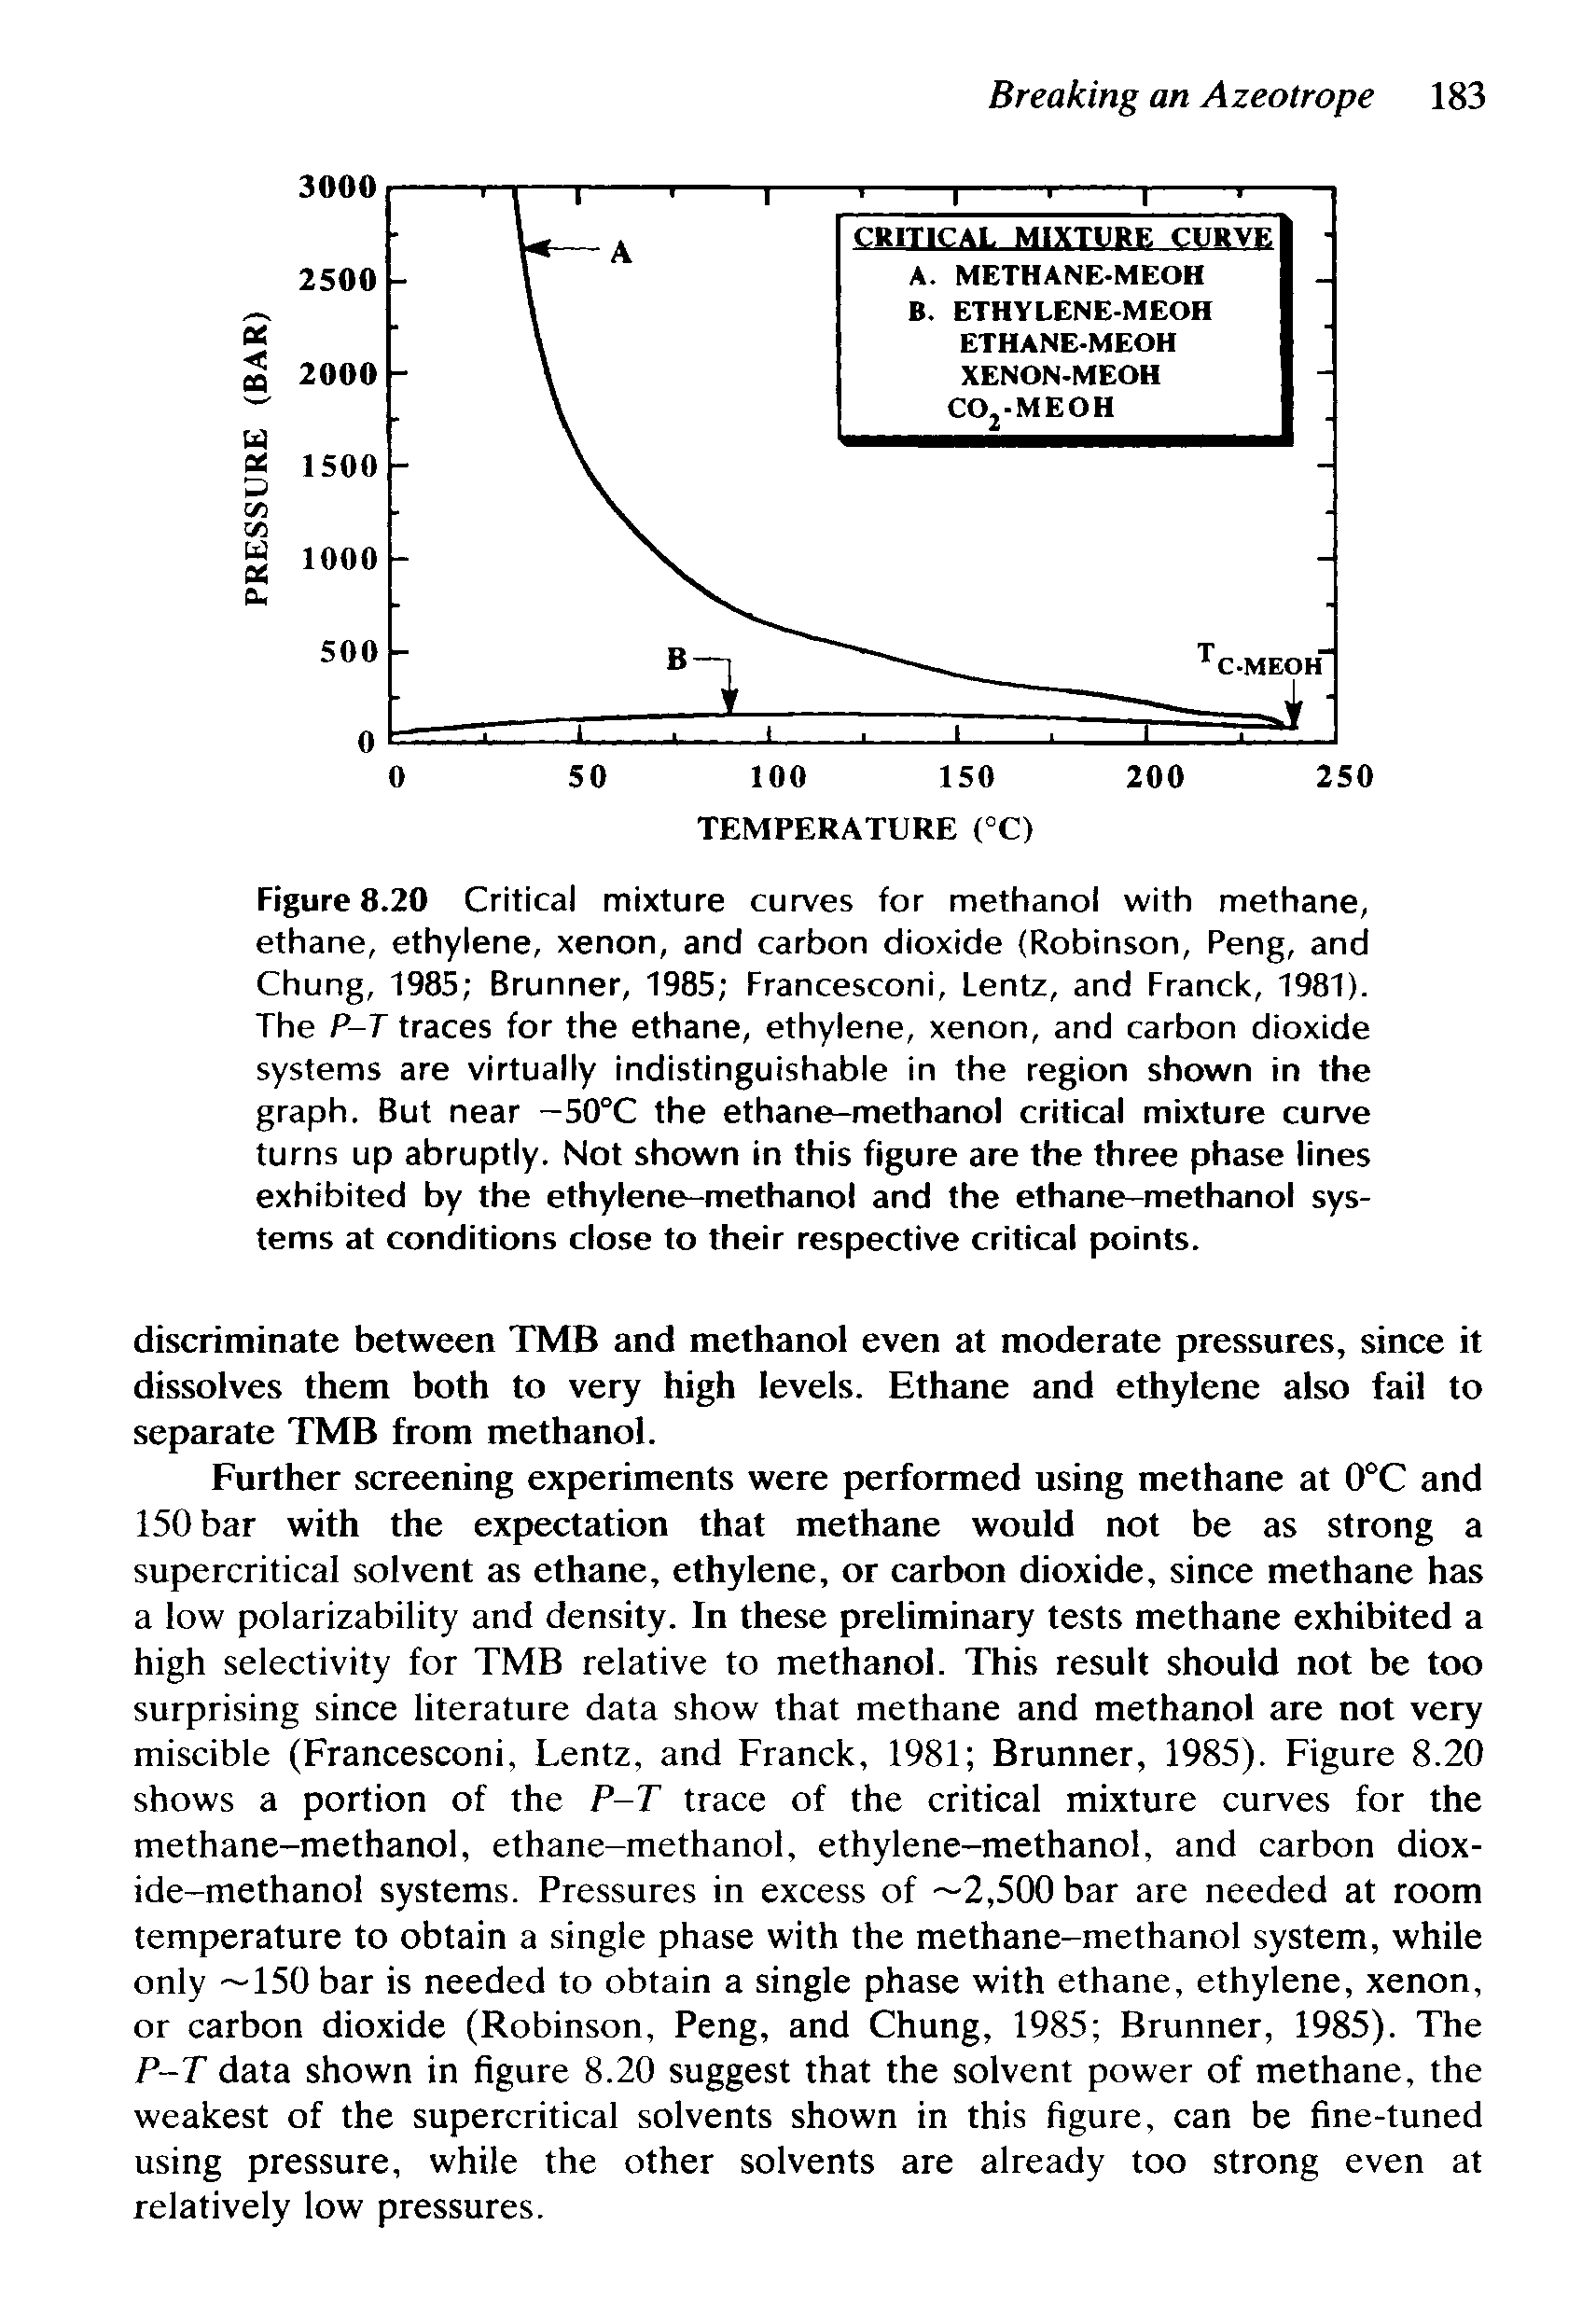 Figure 8.20 Critical mixture curves for methanol with methane, ethane, ethylene, xenon, and carbon dioxide (Robinson, Peng, and Chung, 1985 Brunner, 1985 Francesconi, Lentz, and Franck, 1981). The P-T traces for the ethane, ethylene, xenon, and carbon dioxide systems are virtually indistinguishable in the region shown in the graph. But near —50°C the ethane-methanol critical mixture curve turns up abruptly. Not shown in this figure are the three phase lines exhibited by the ethylene-methanol and the ethane-methanol systems at conditions close to their respective critical points.